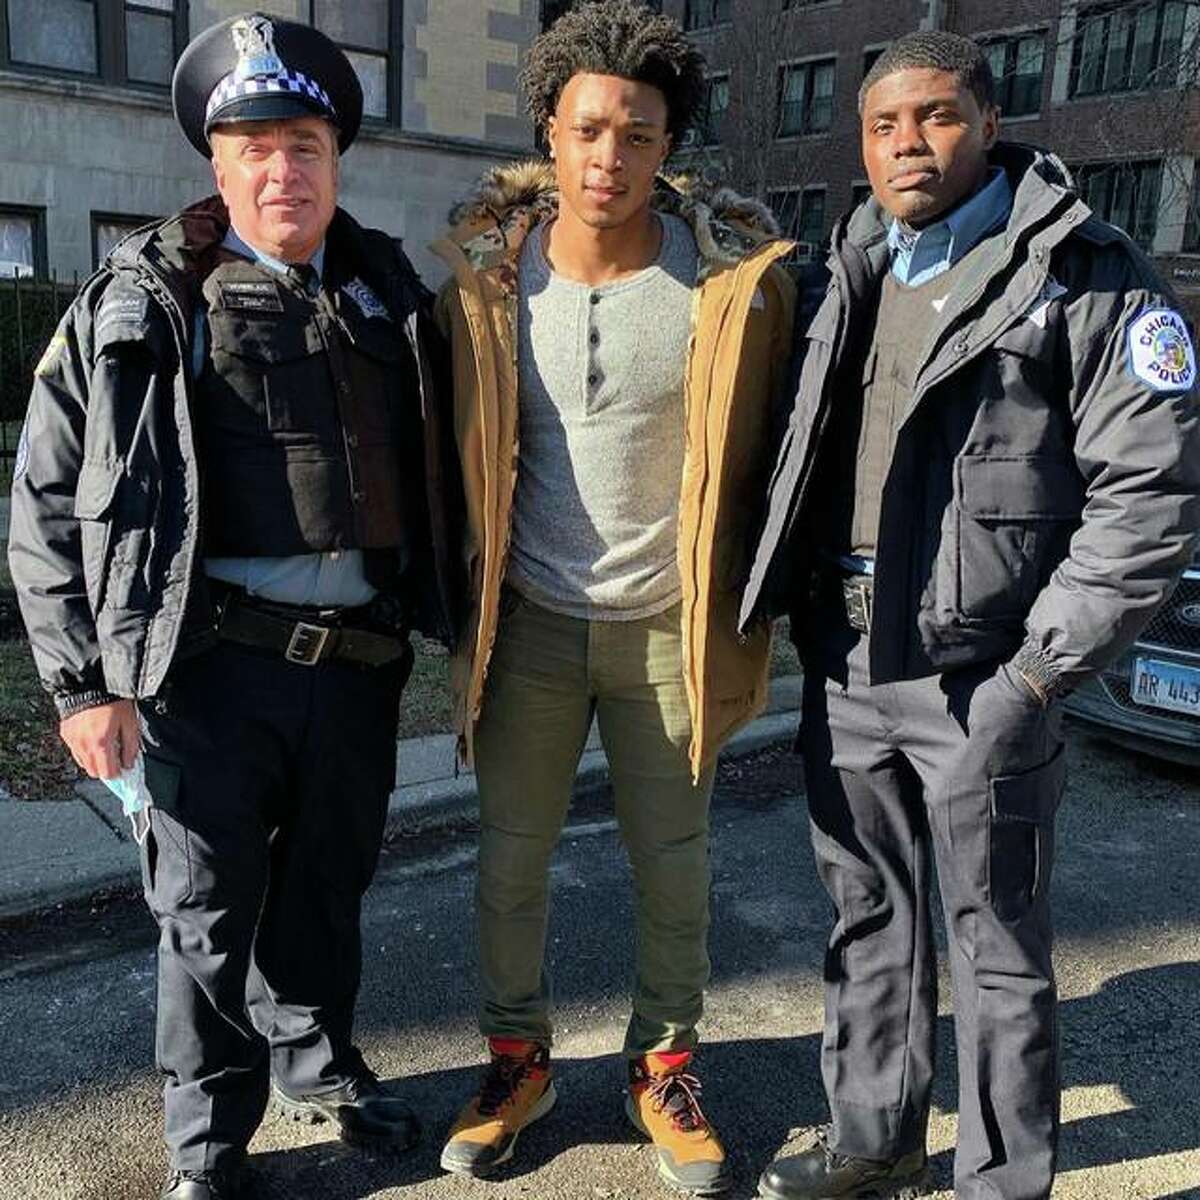 Edwardsville High School graduate Shawn Roundtree Jr., center, pictured with Michael Rispoli, left, and castmate from their scene in Chicago P.D.